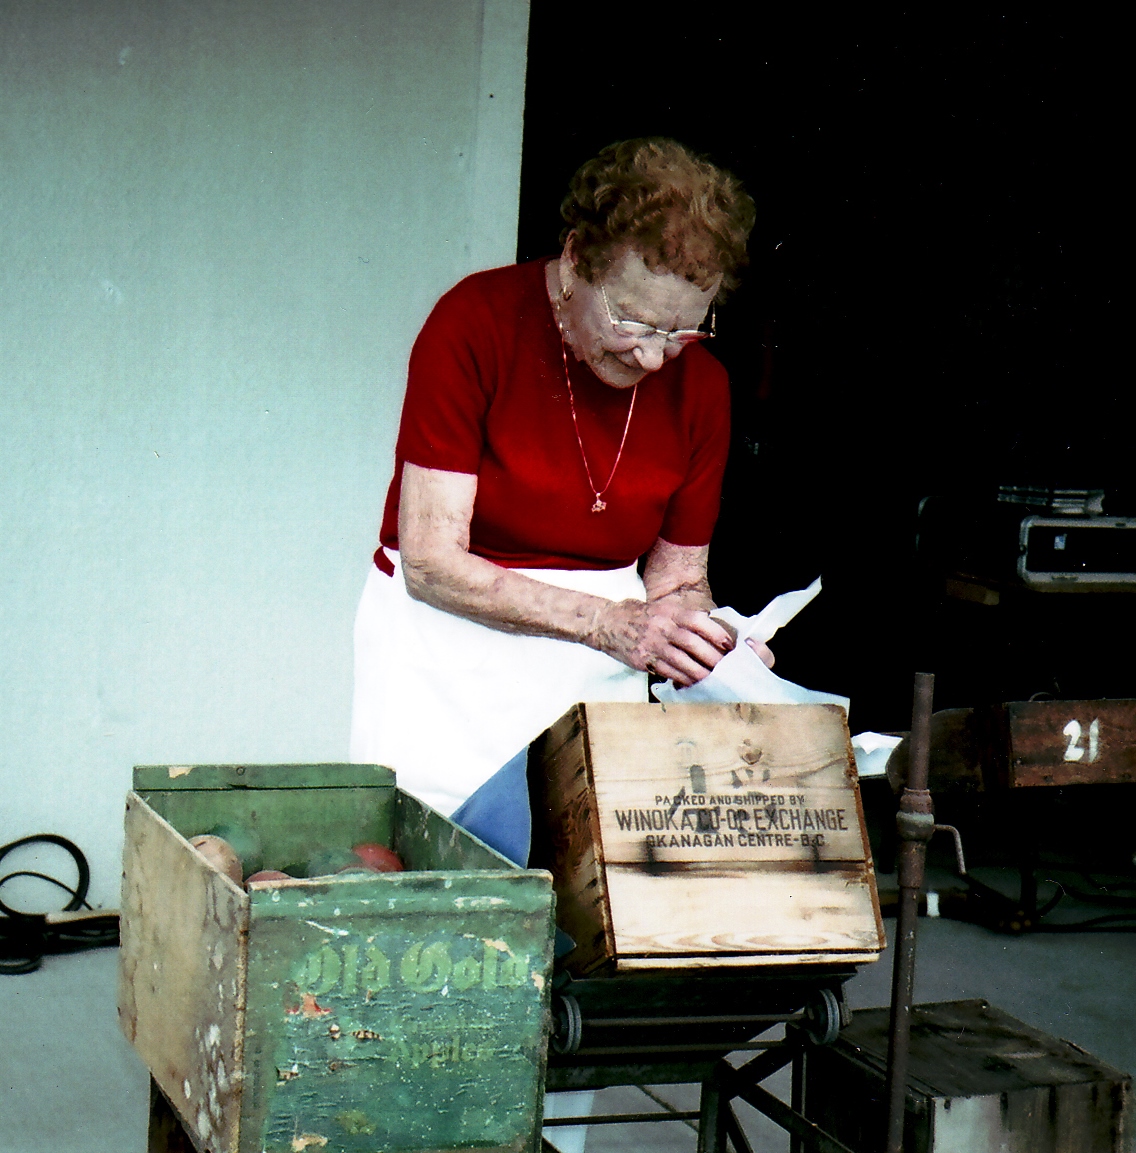 Colour photo of a senior woman standing on a patio, wrapping a wooden apple and putting it into one of two apple boxes in front of her. She has curly red hair and wears a red sweater.